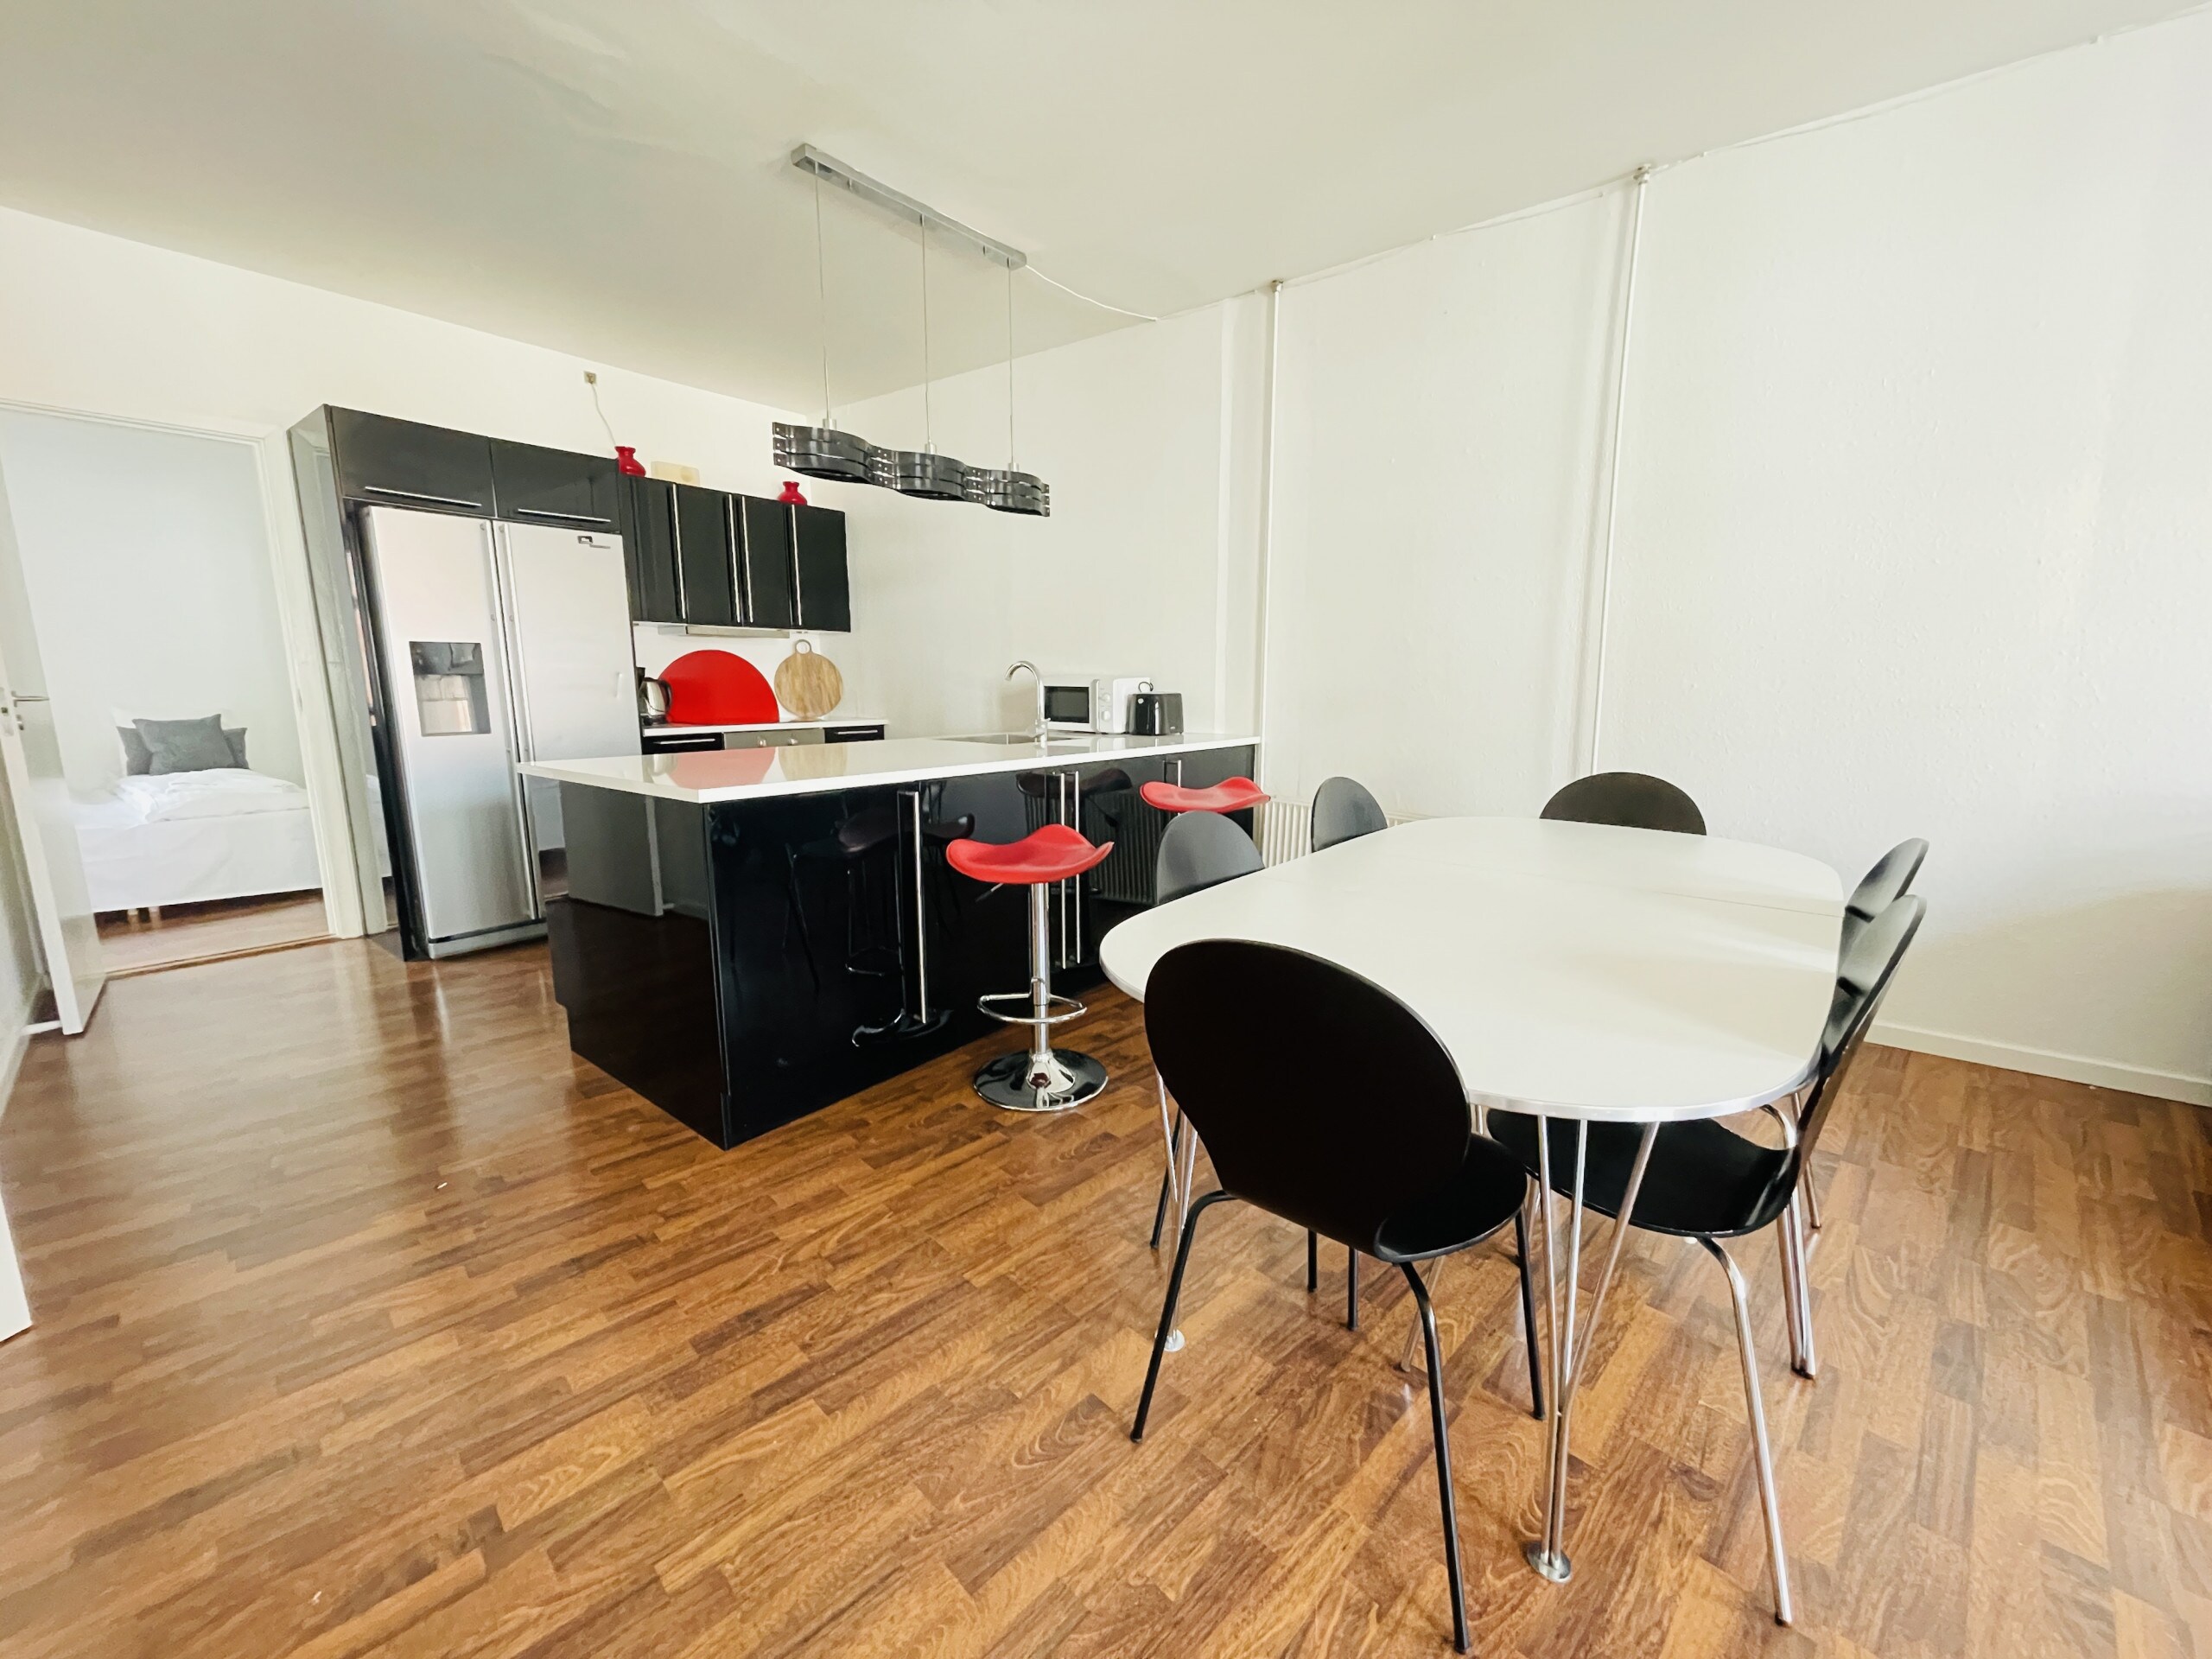 Property Image 2 - aday - Beautiful Spacious 2 Bedroom Apartment in the Center of Randers